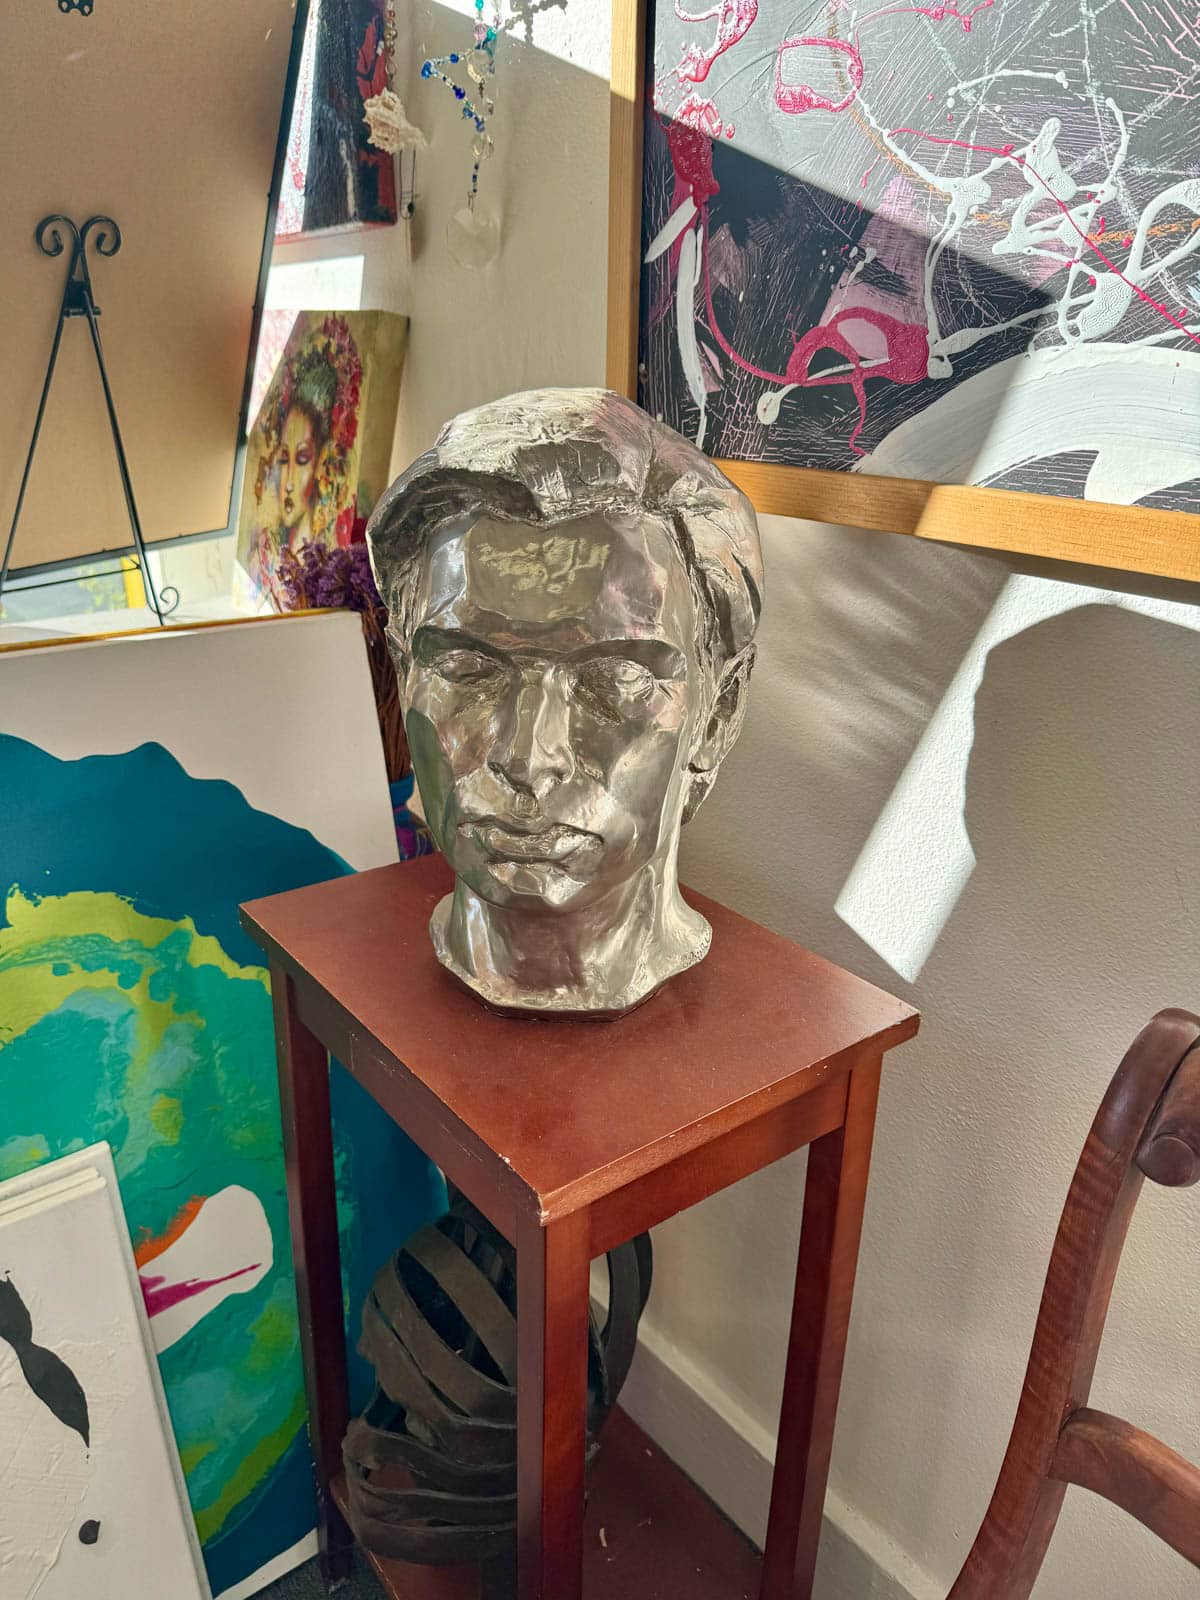 Photo of sculpture of a man's head on a wooden table in a gallery.